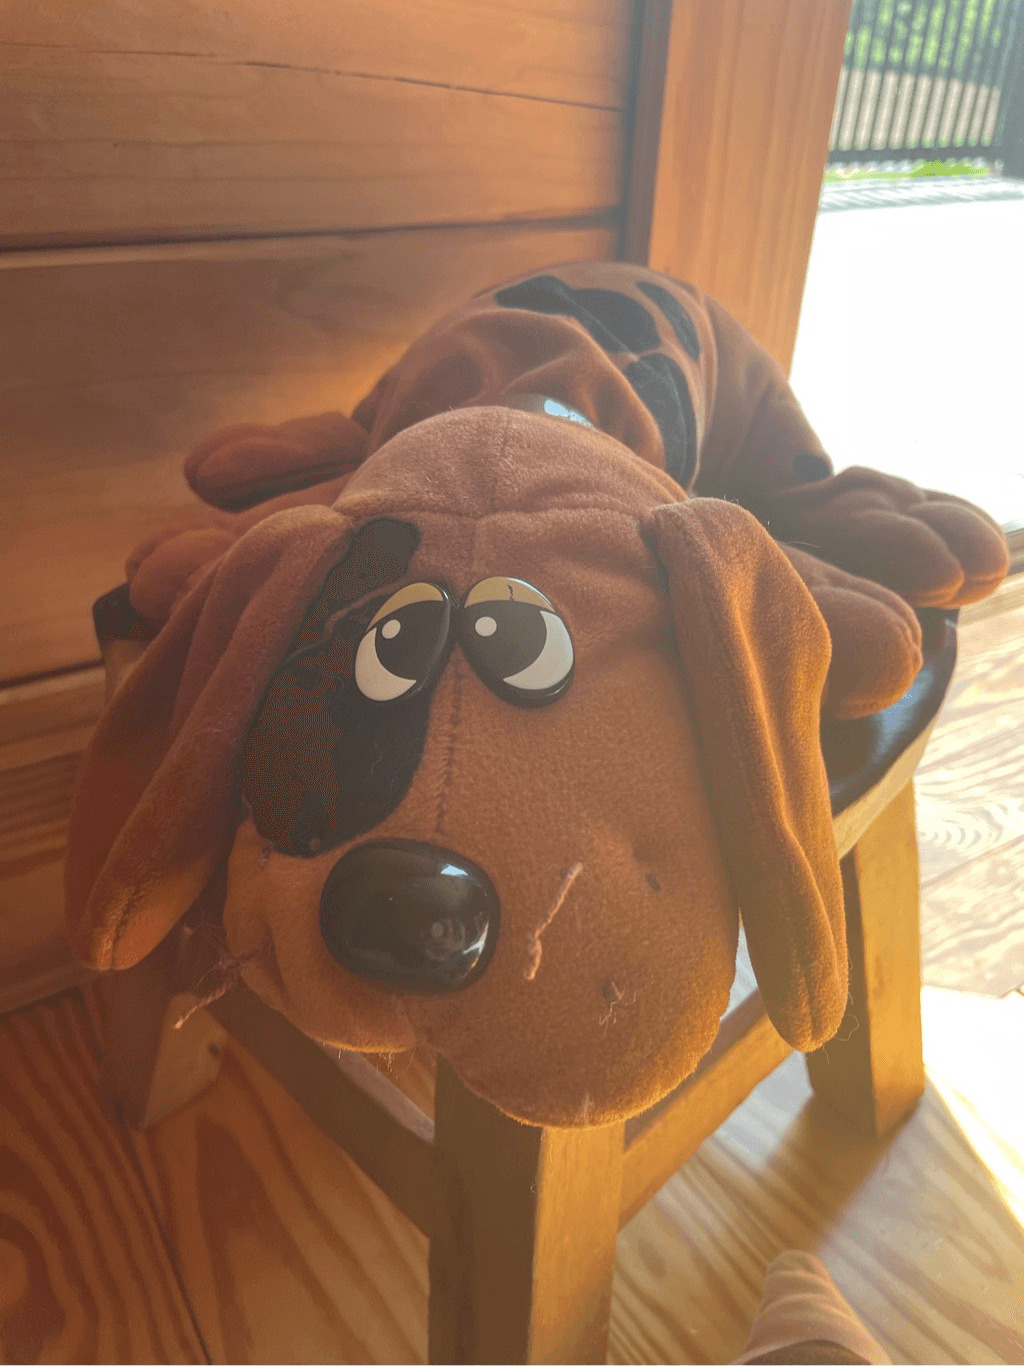 1985 Tonka Pound Puppies Golden/Dk Brown Collectible 19” Long Puppy Dog w/Collar